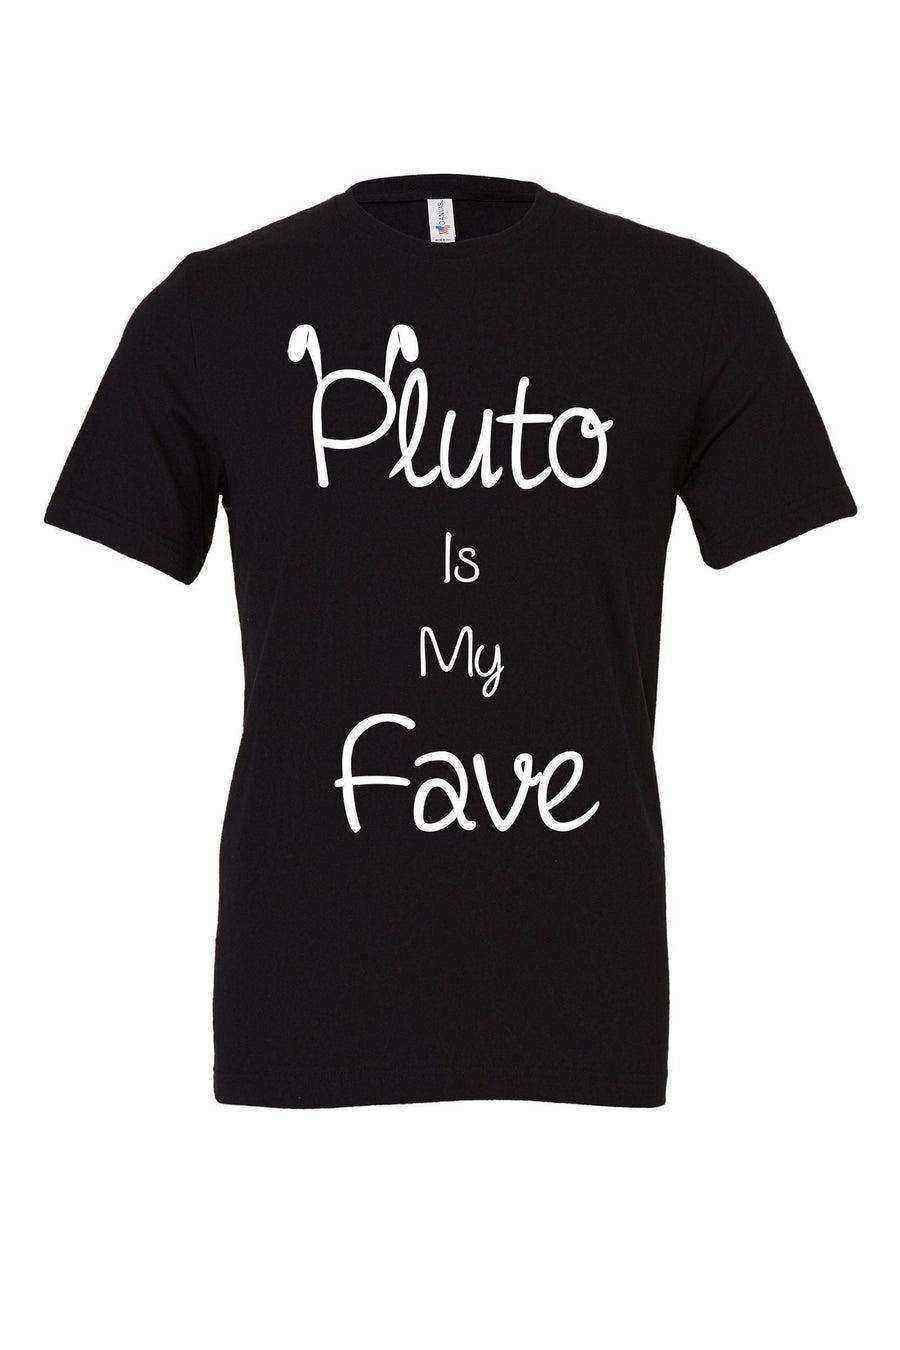 Womens | Pluto is my Fave Shirt - Dylan's Tees